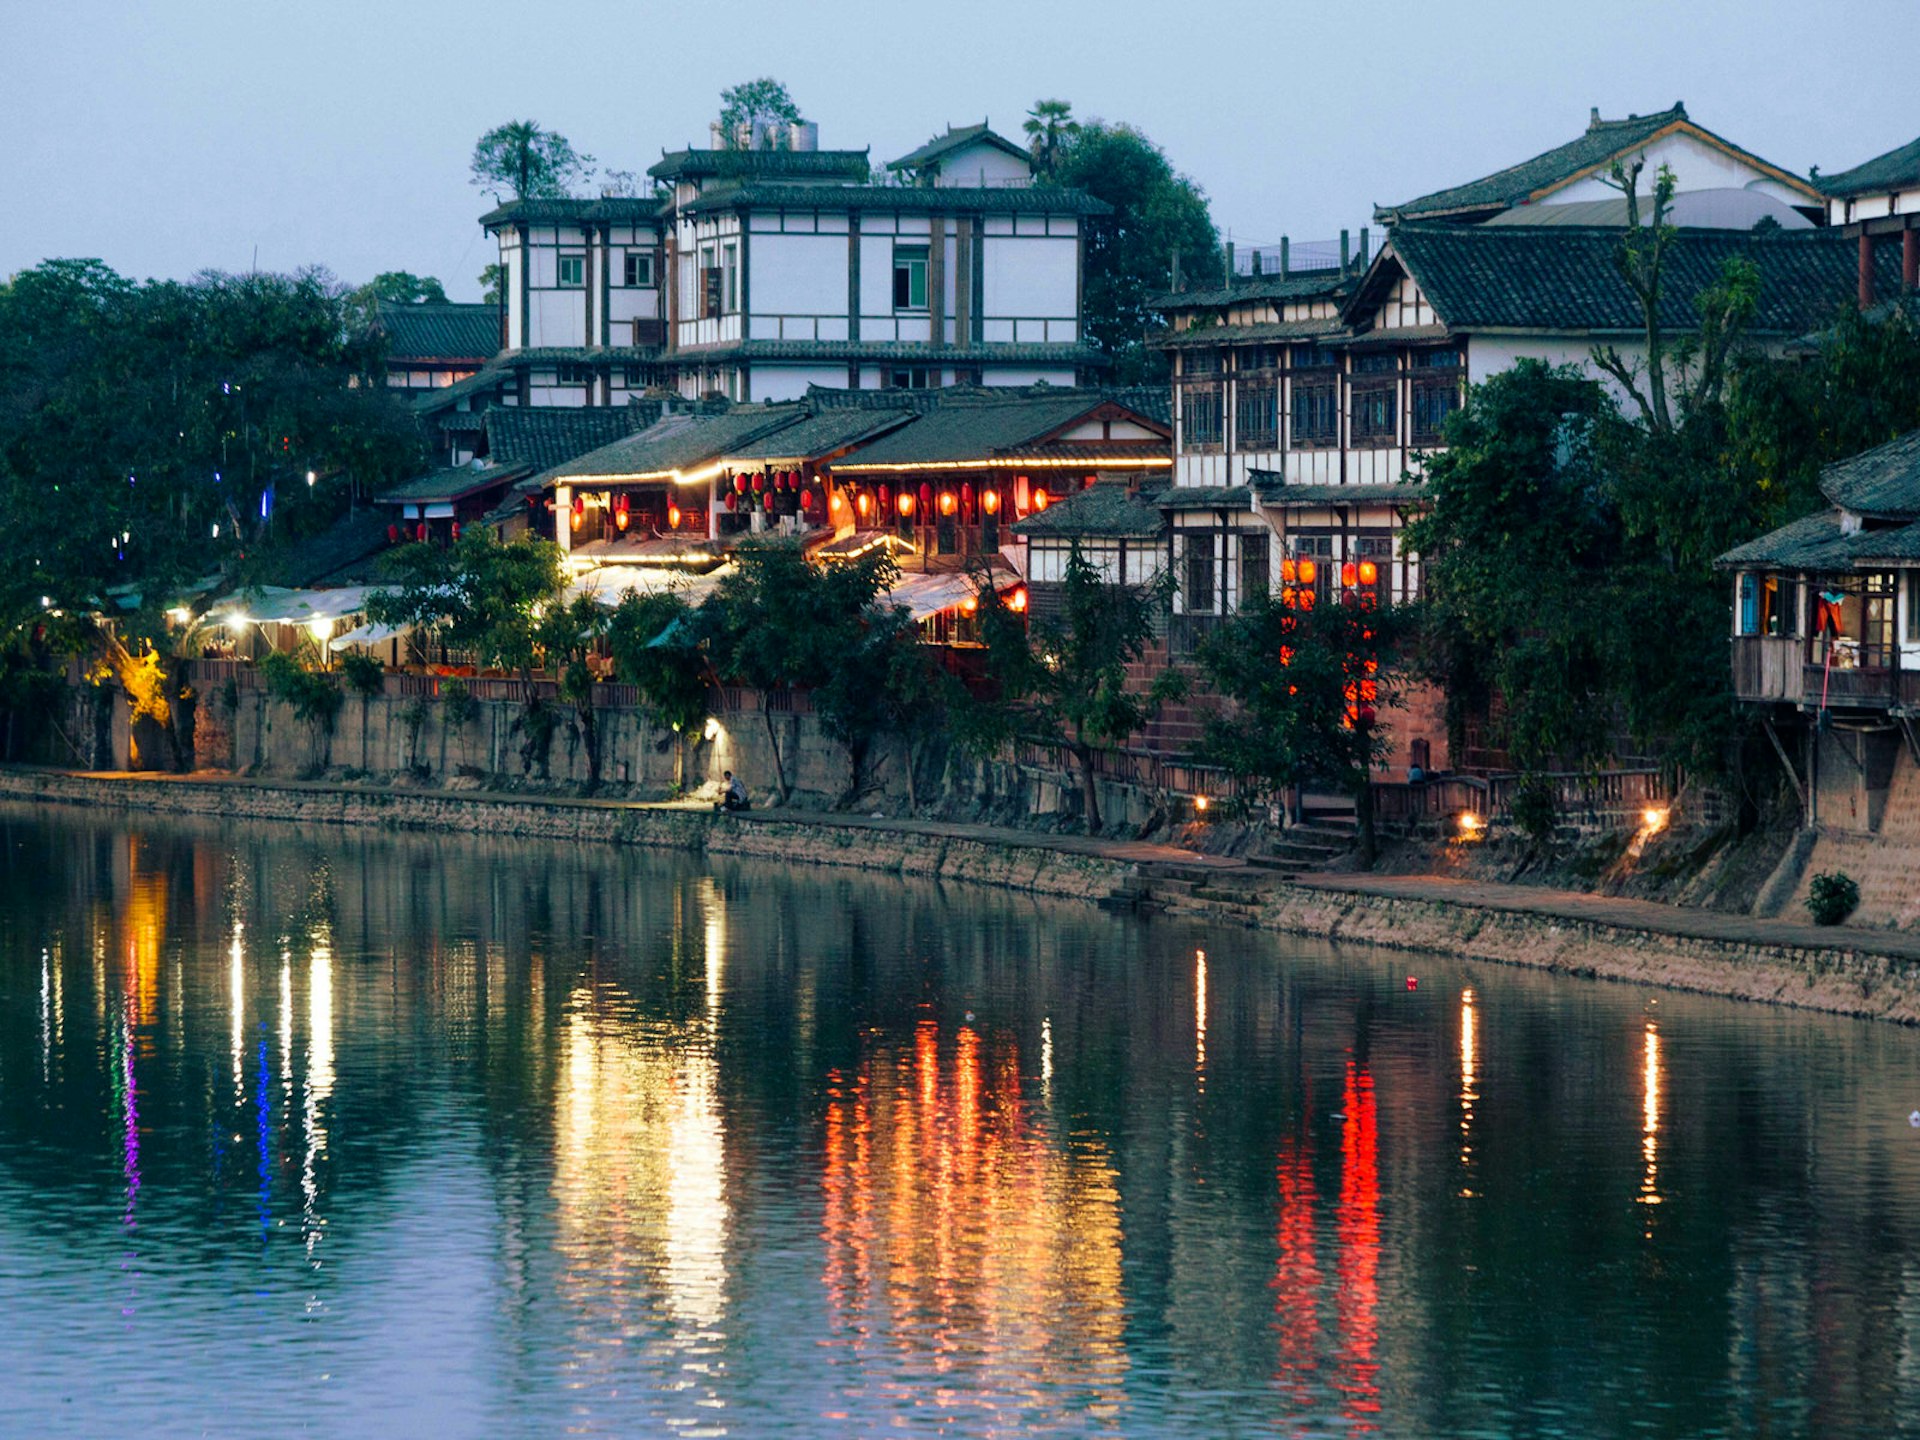 Pingle's old town glitters along the Baimo River © Stephen Lioy / Lonely Planet